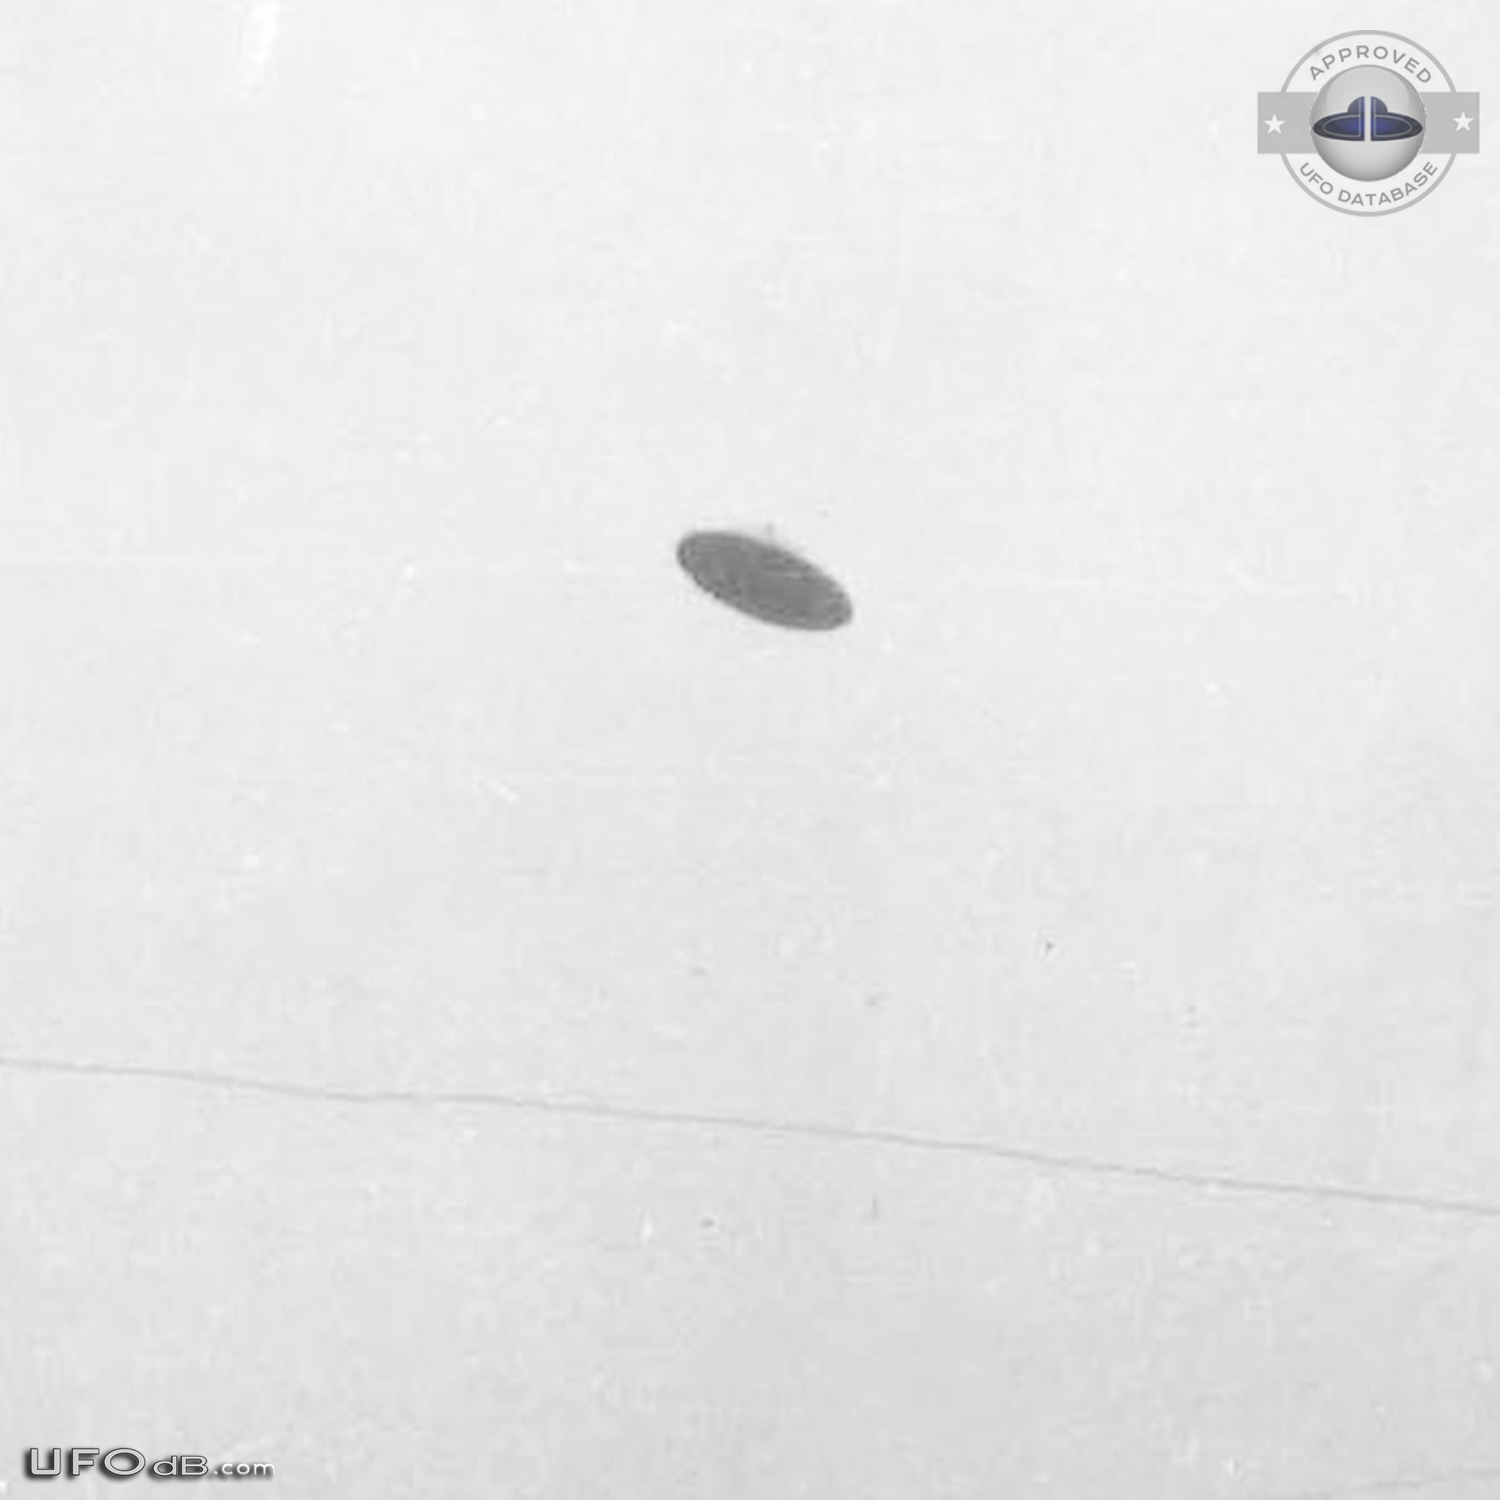 One of the Best UFO picture of all time - 1950 McMinnville, Oregon UFO Picture #423-5